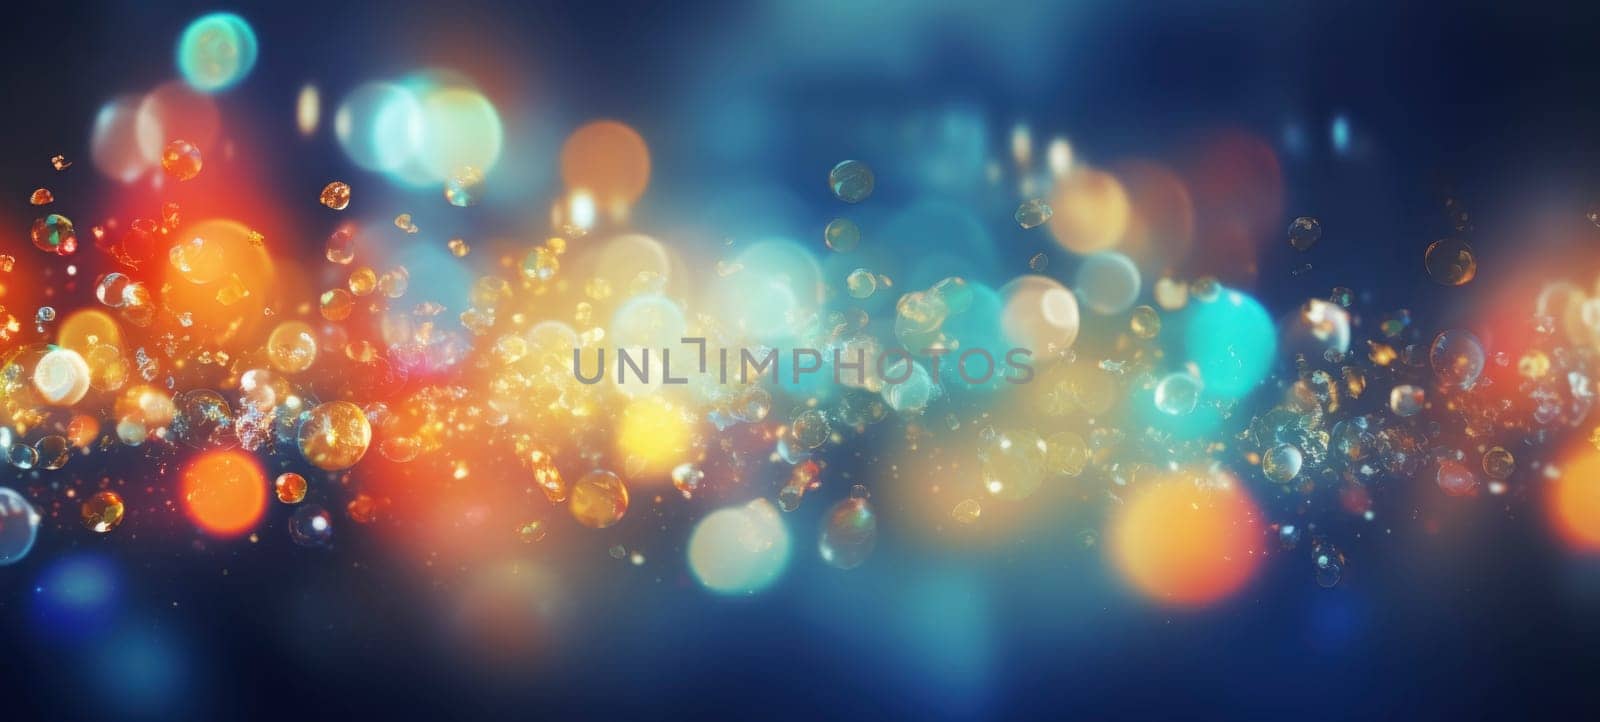 Vibrant abstract background featuring a dynamic cluster of bokeh lights in a myriad of colors.